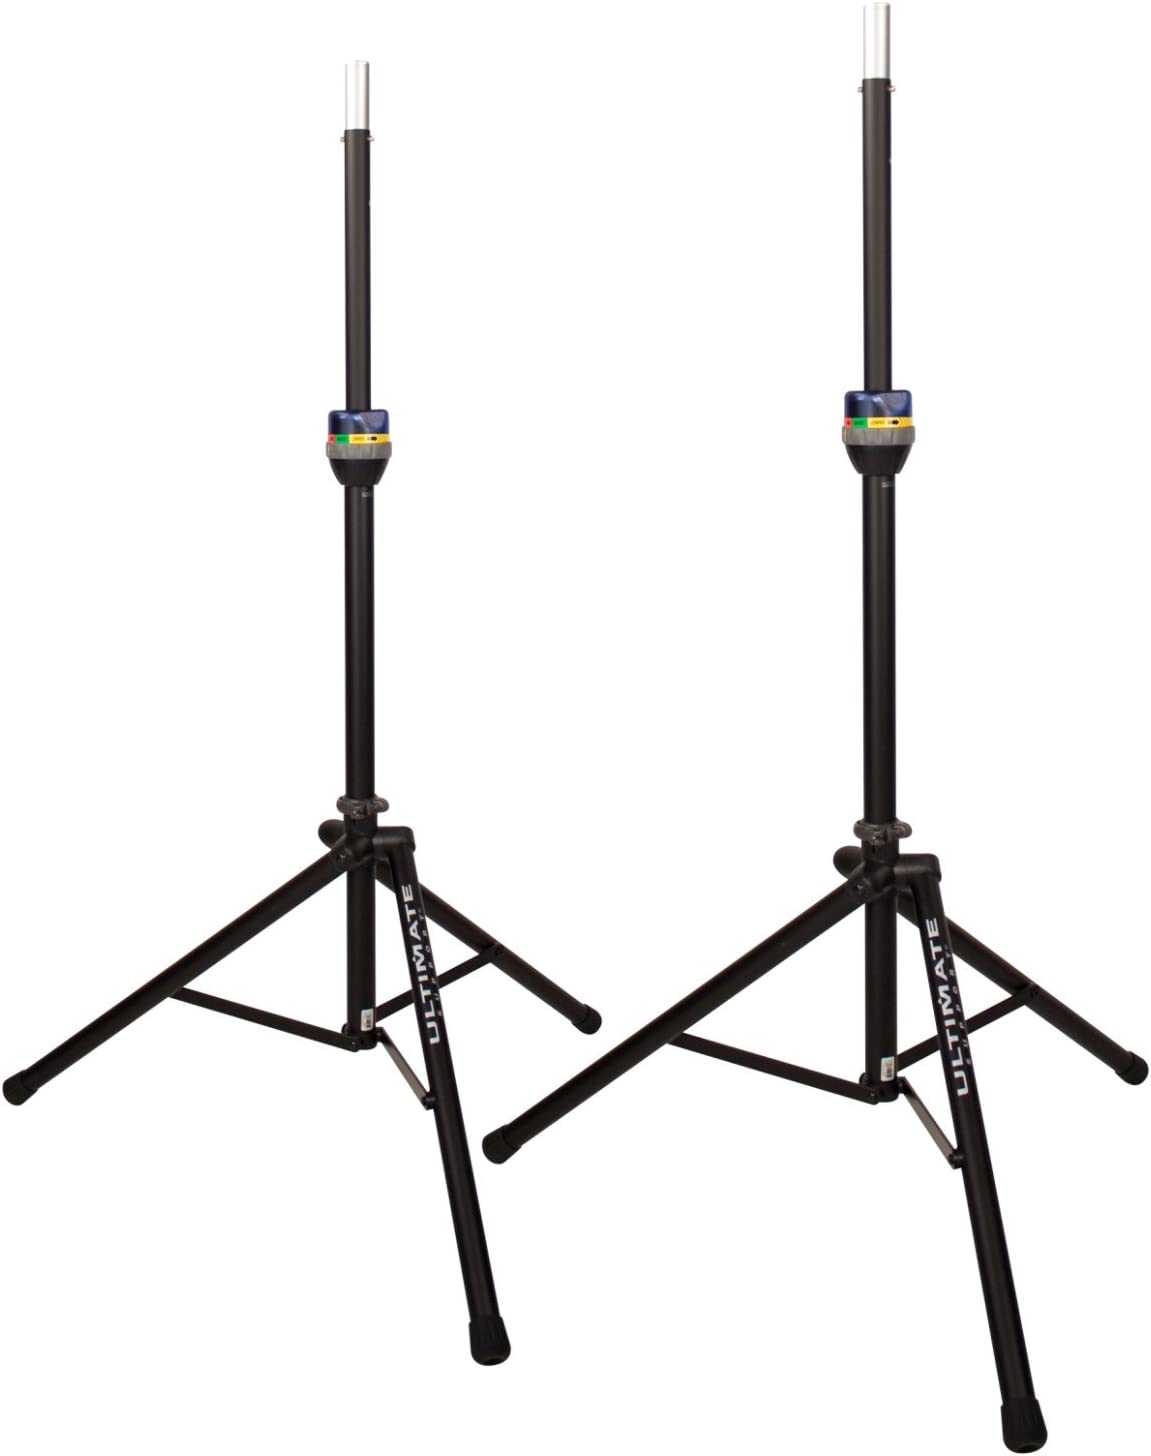 2 Ultimate Support TS-90B TeleLock Series Lift-assist Aluminum Speaker Stand with Speaker Stand Bag